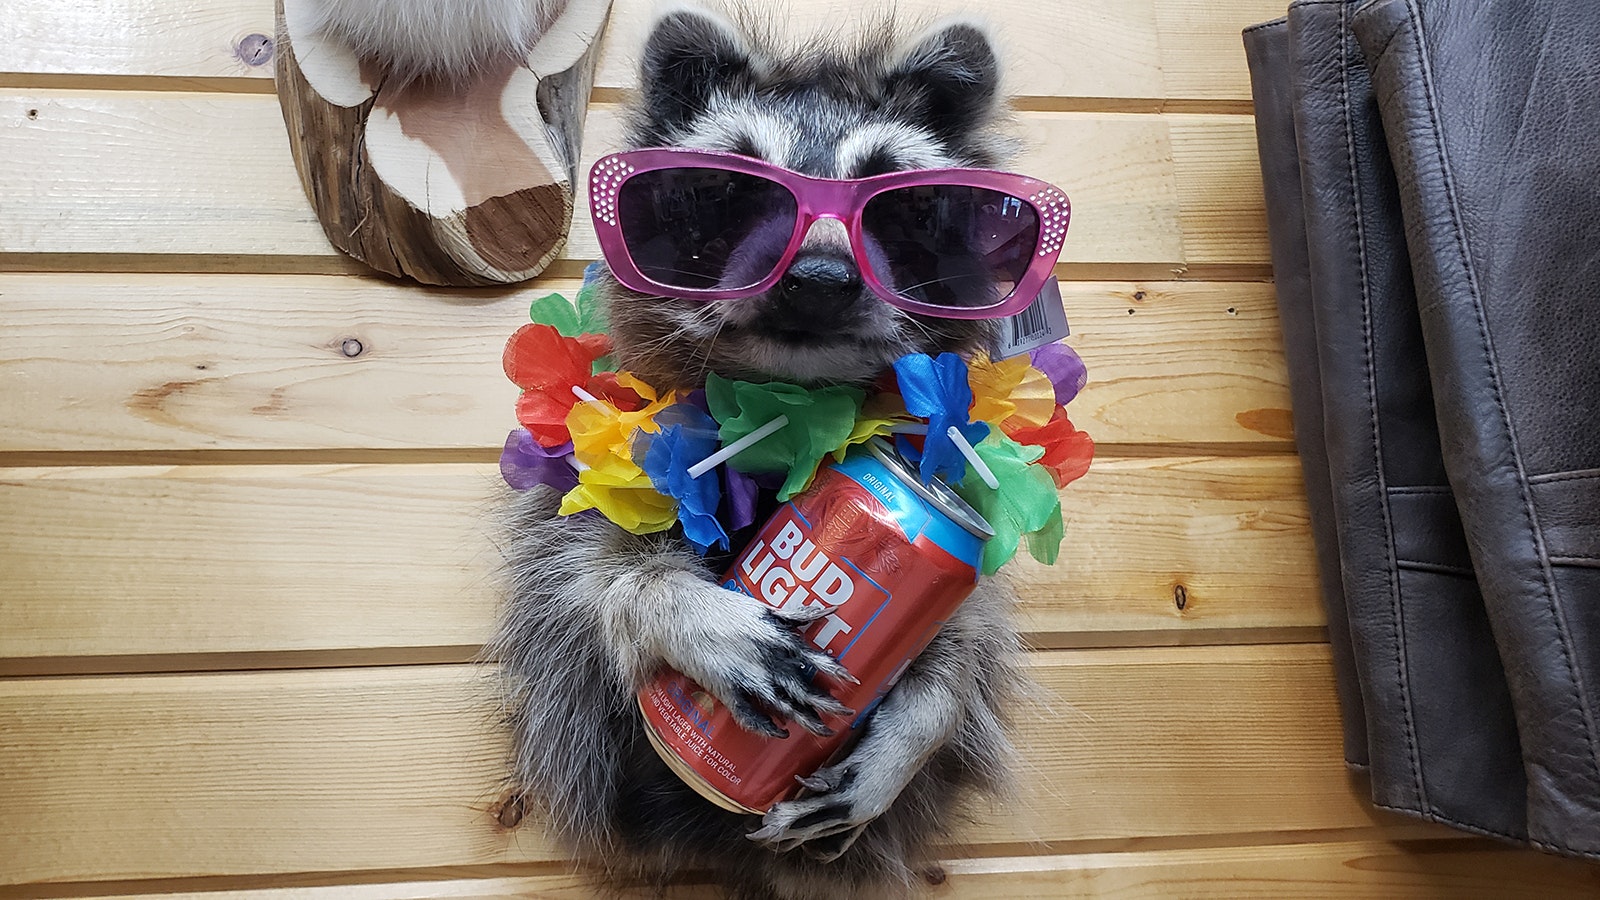 Even the party raccoon approves of buffalo fur coats.